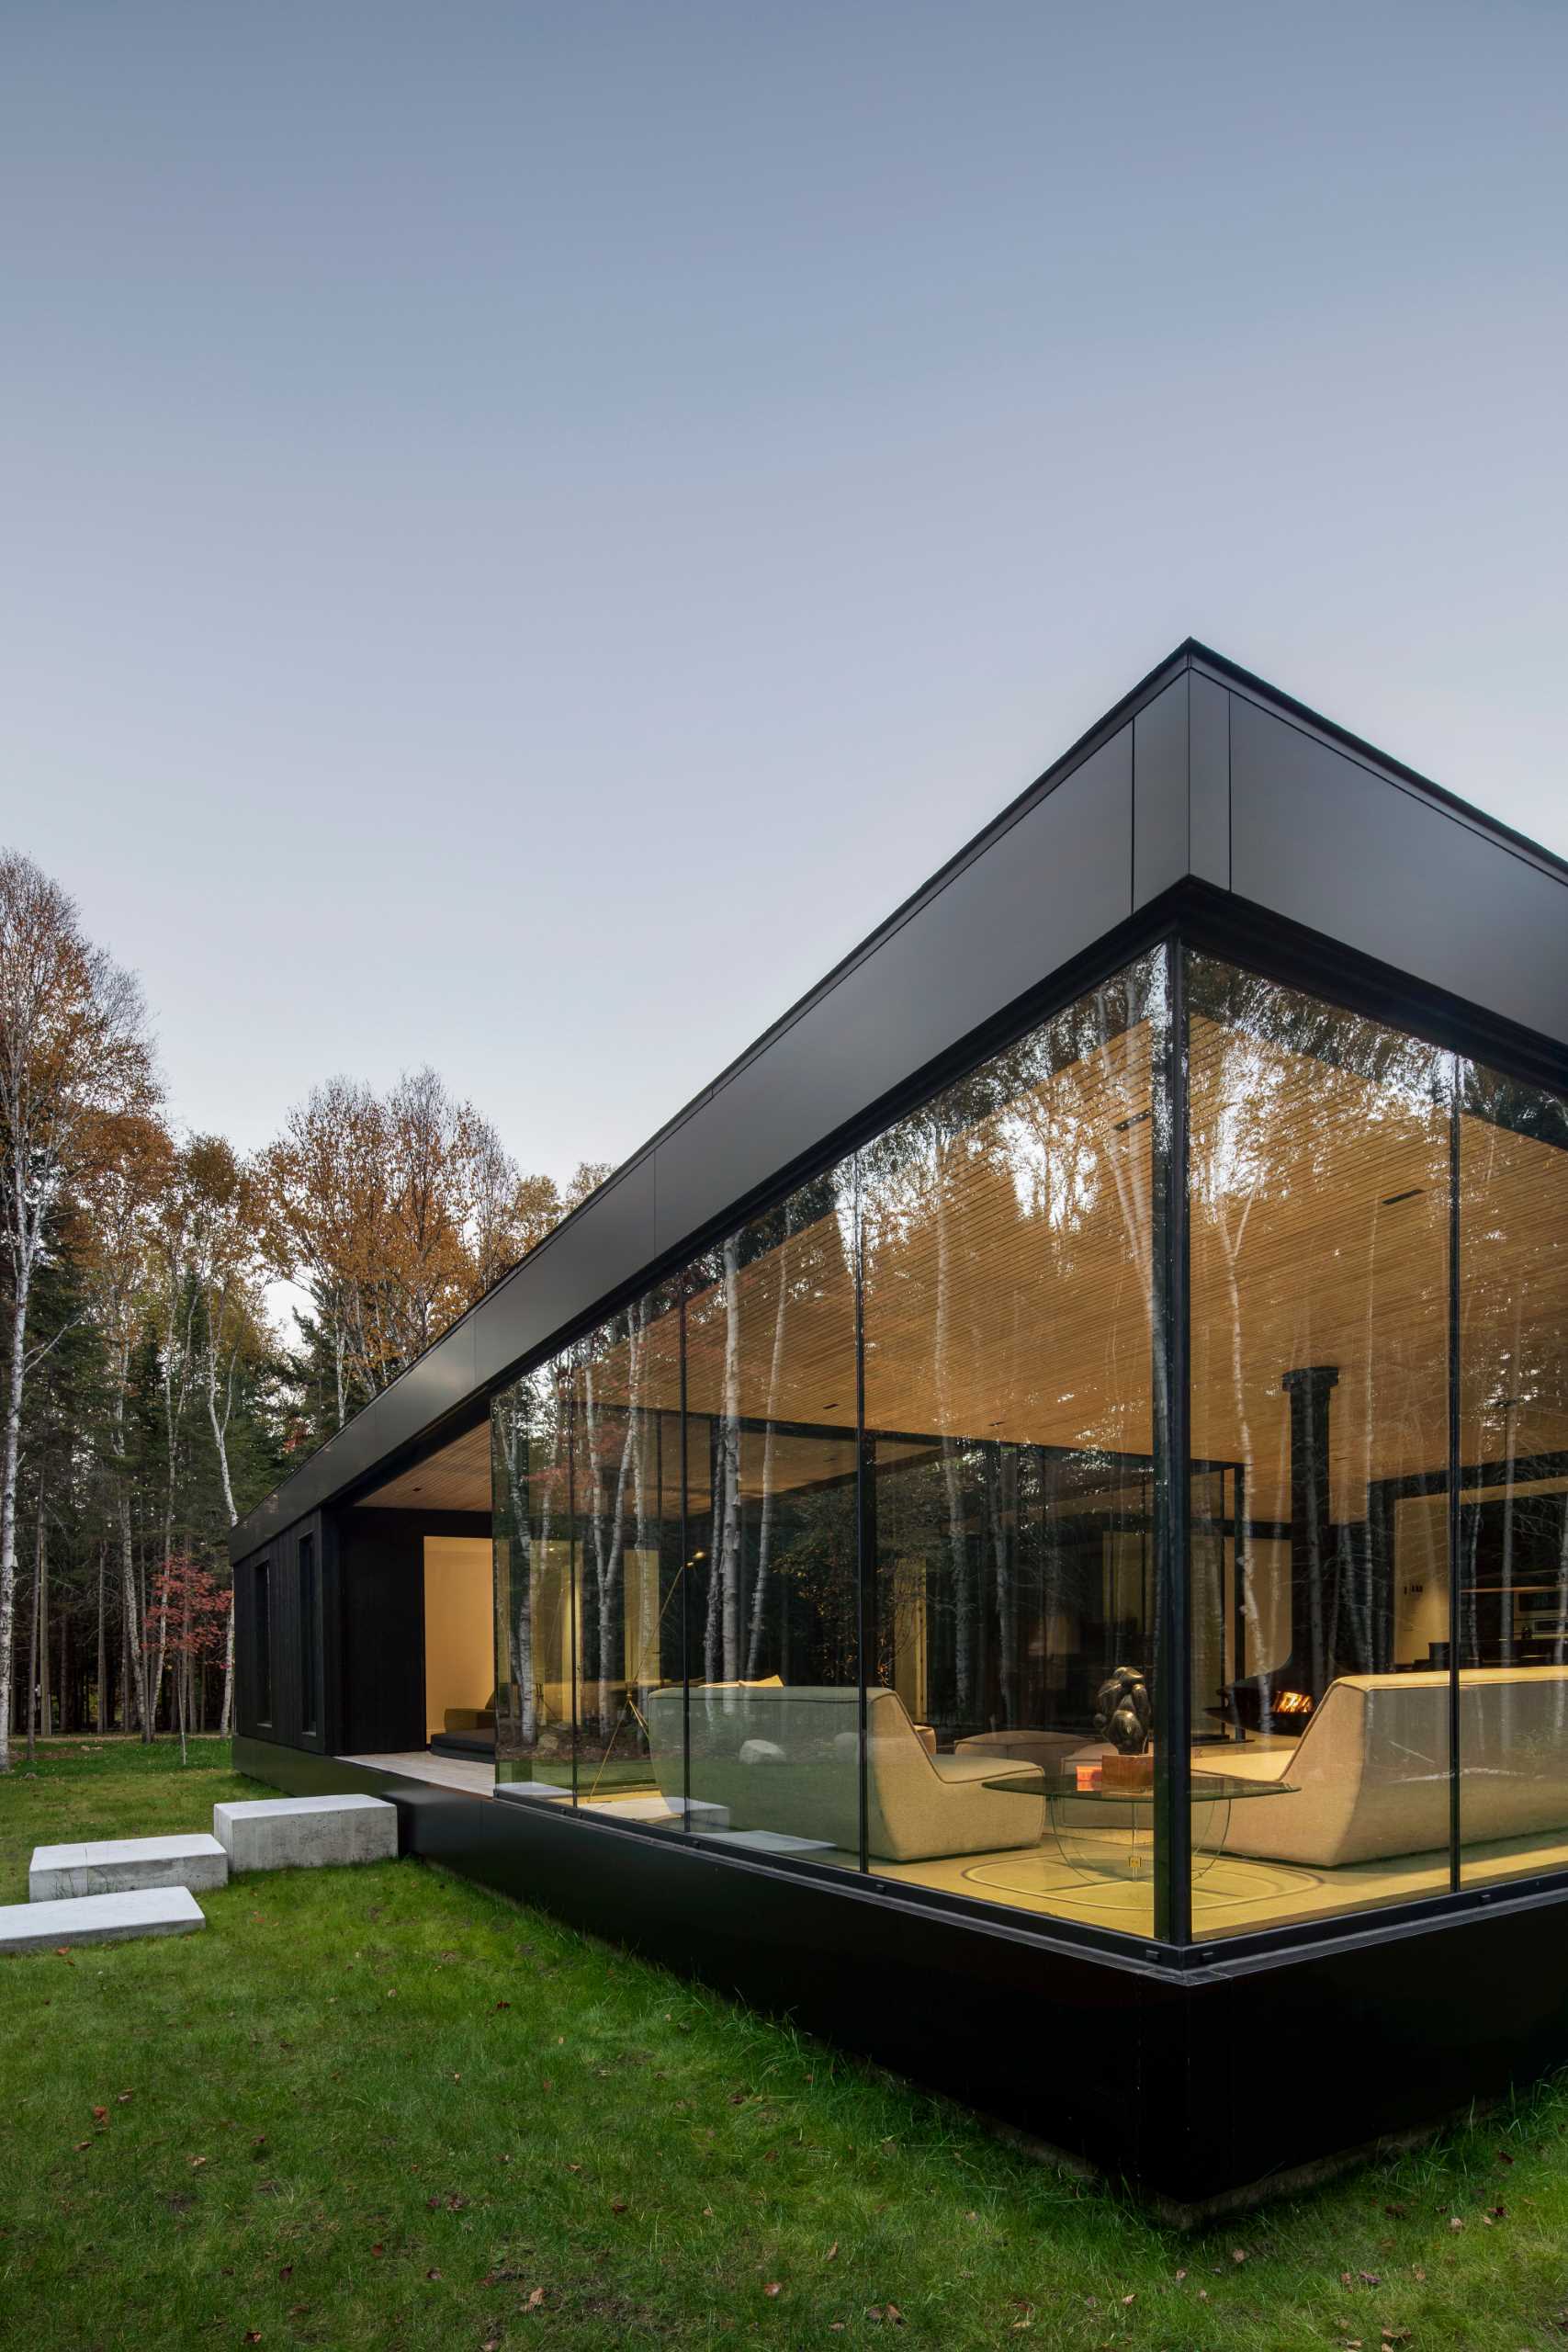 The striking black metal and wood exterior of this modern home contrasts the bright interior.